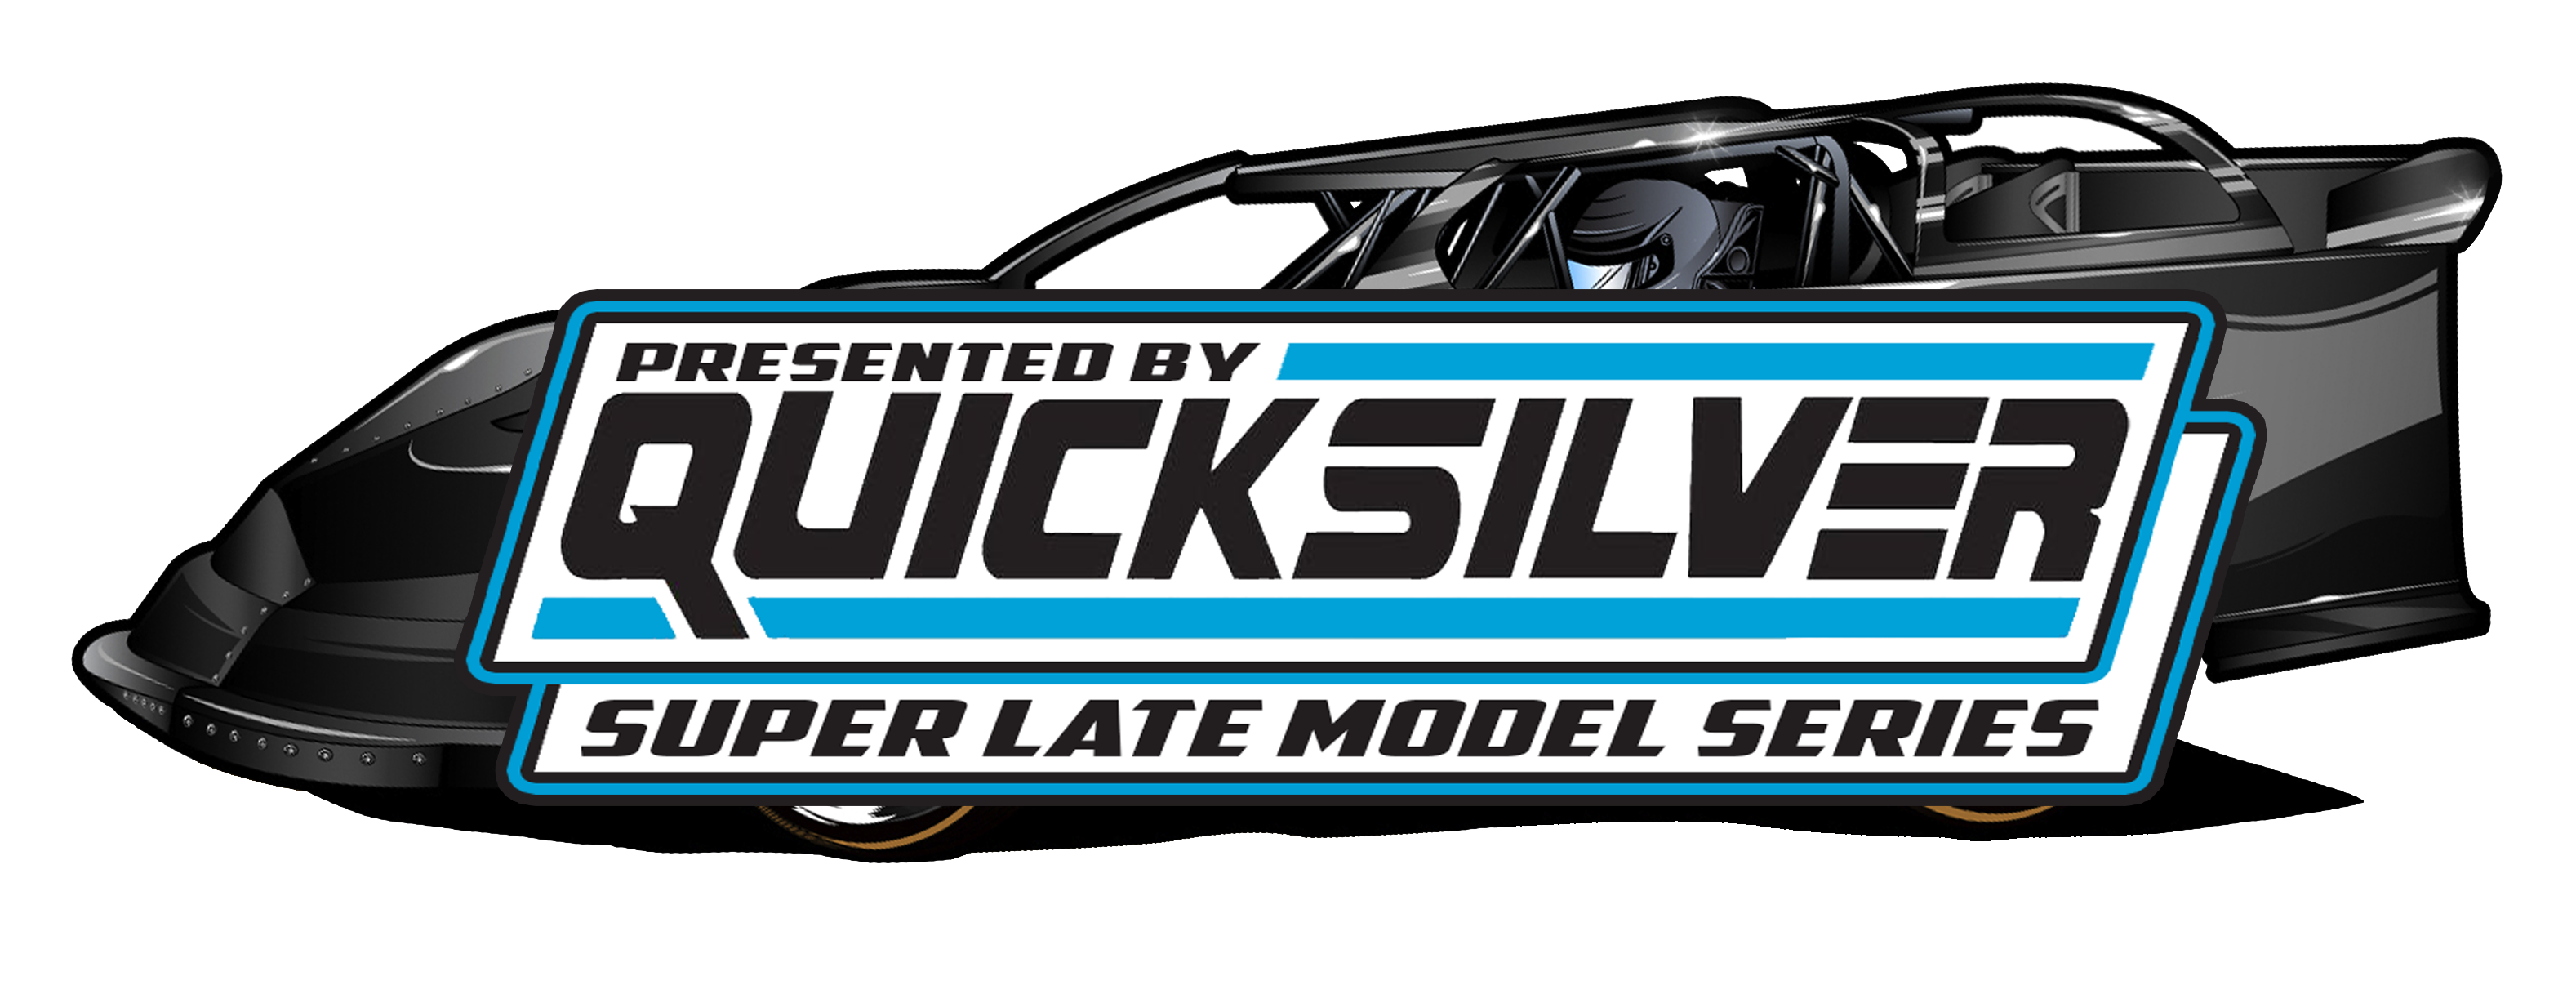 Dirt Track Quicksilver 602 Late Model $4300 To Win and $430 to Start JR Knight Memorial